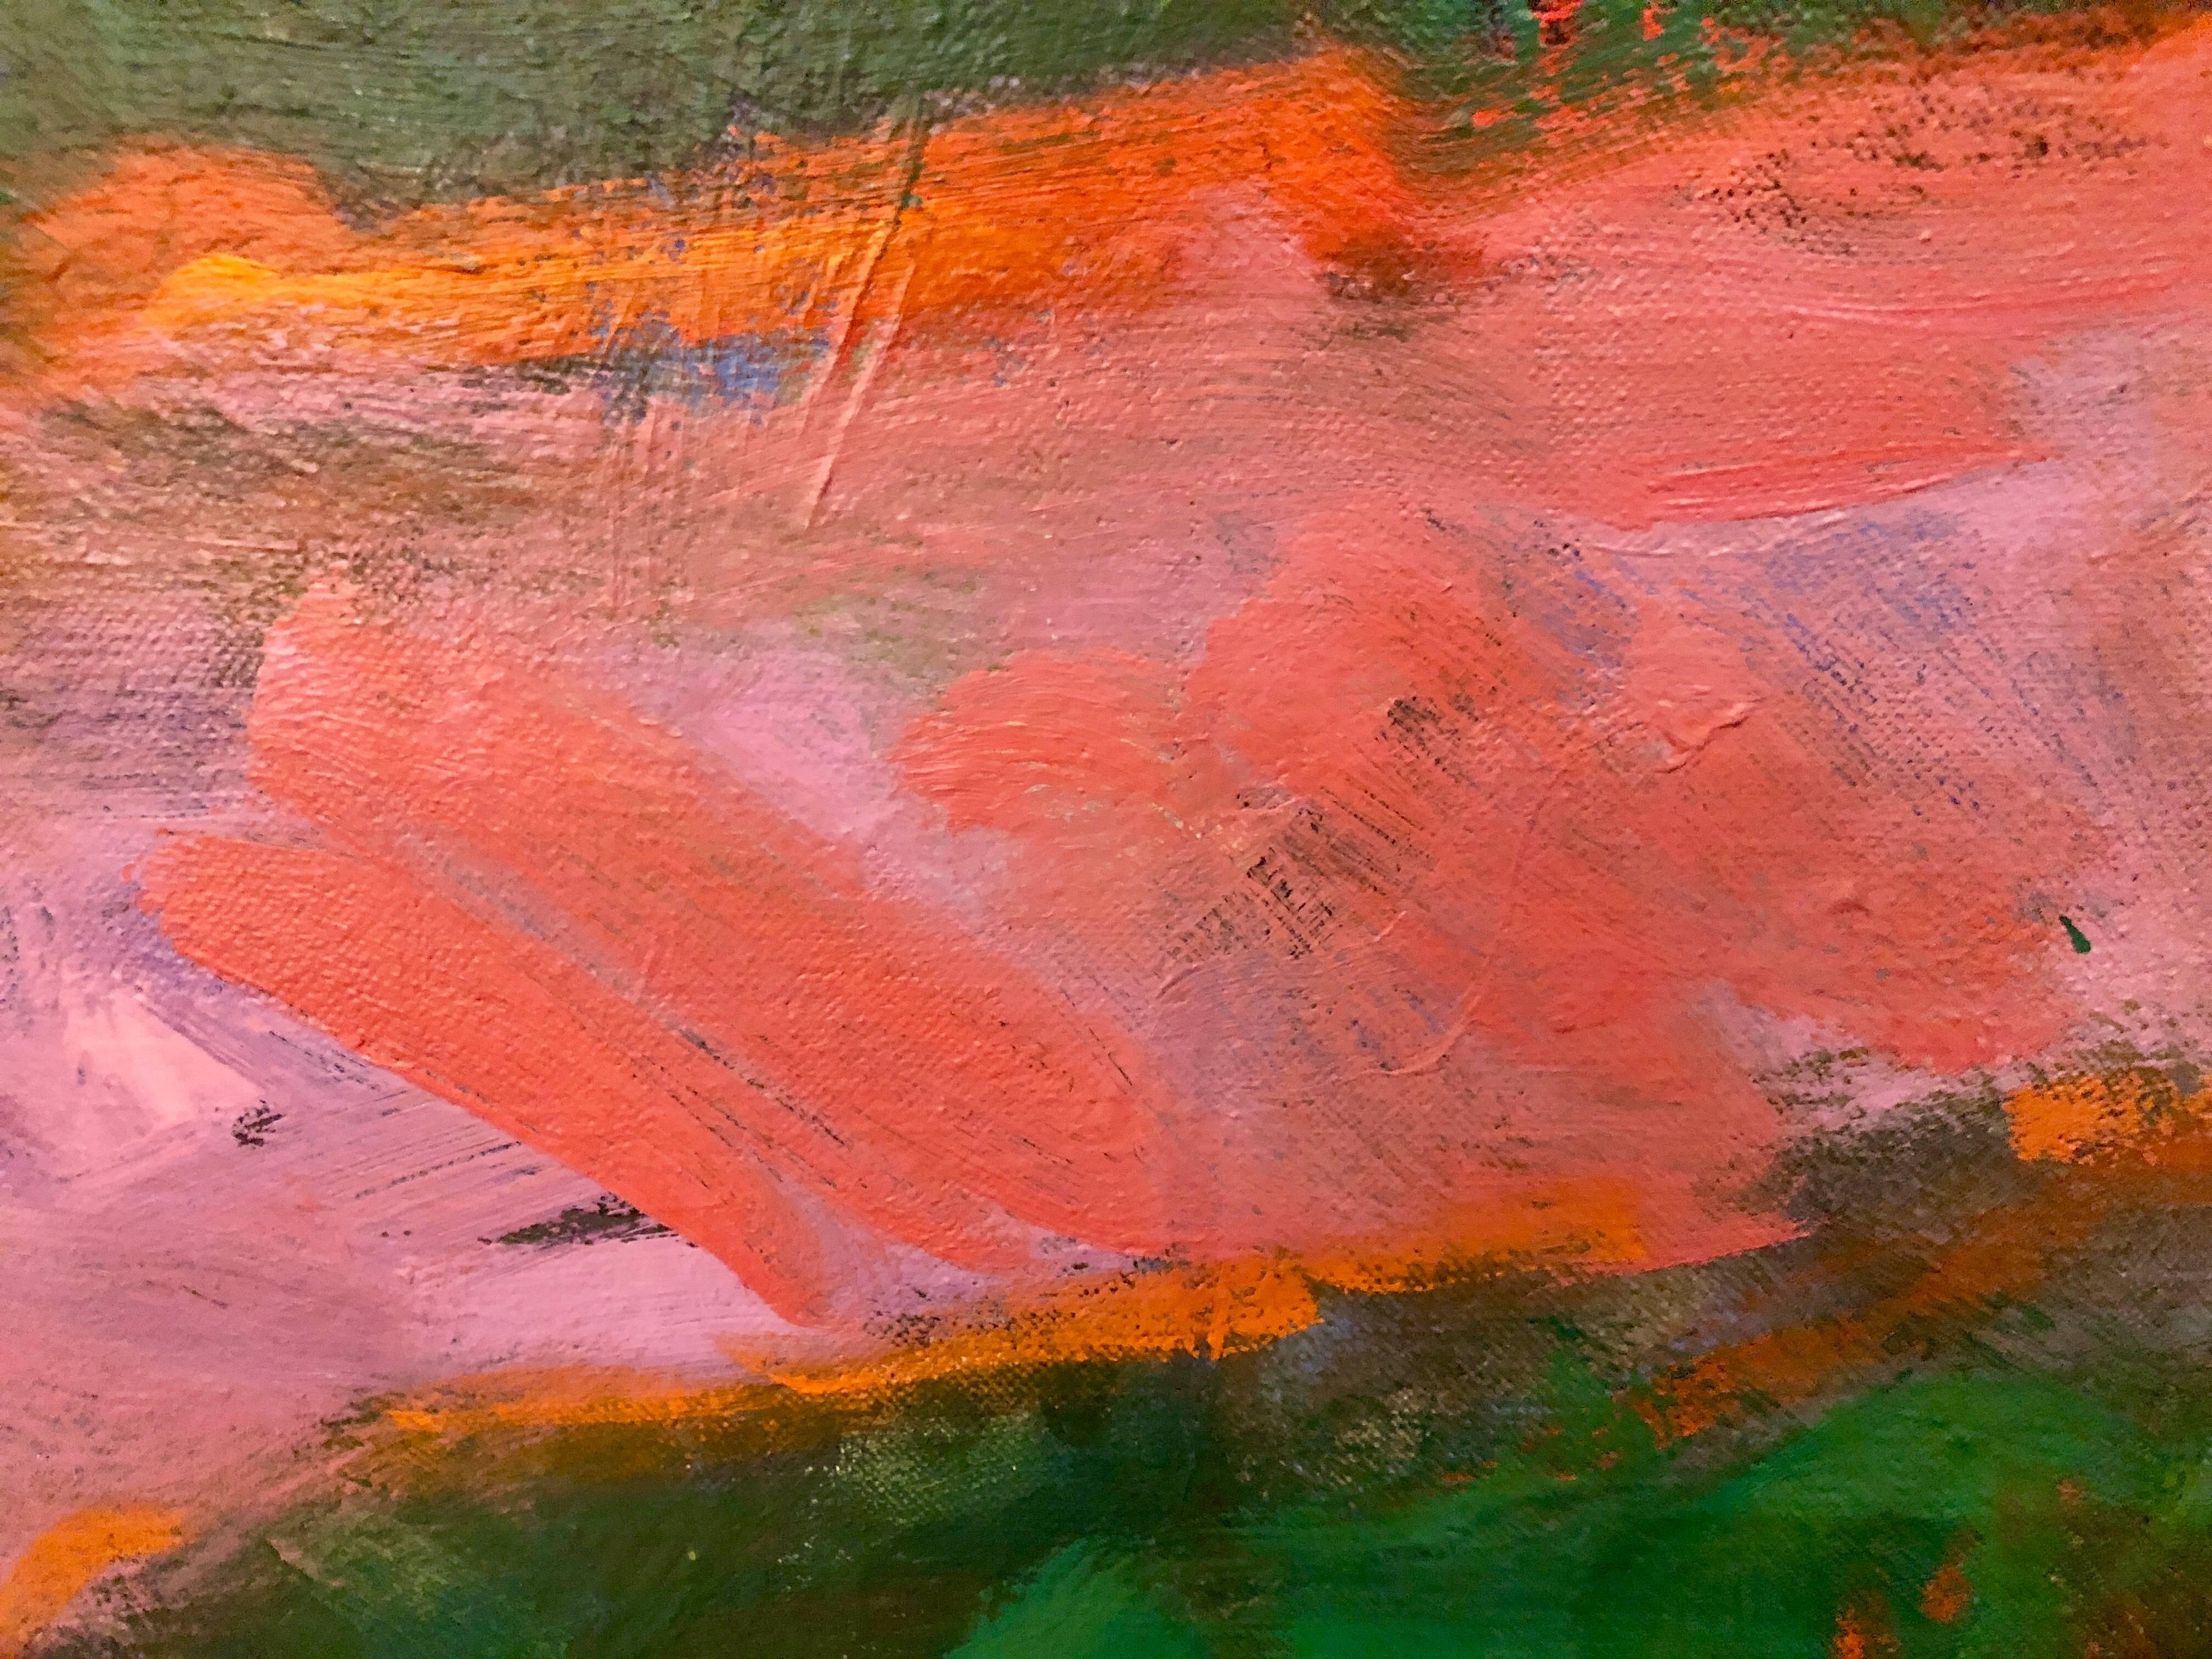 Landscape - Orange Abstract Painting by Max Kahn